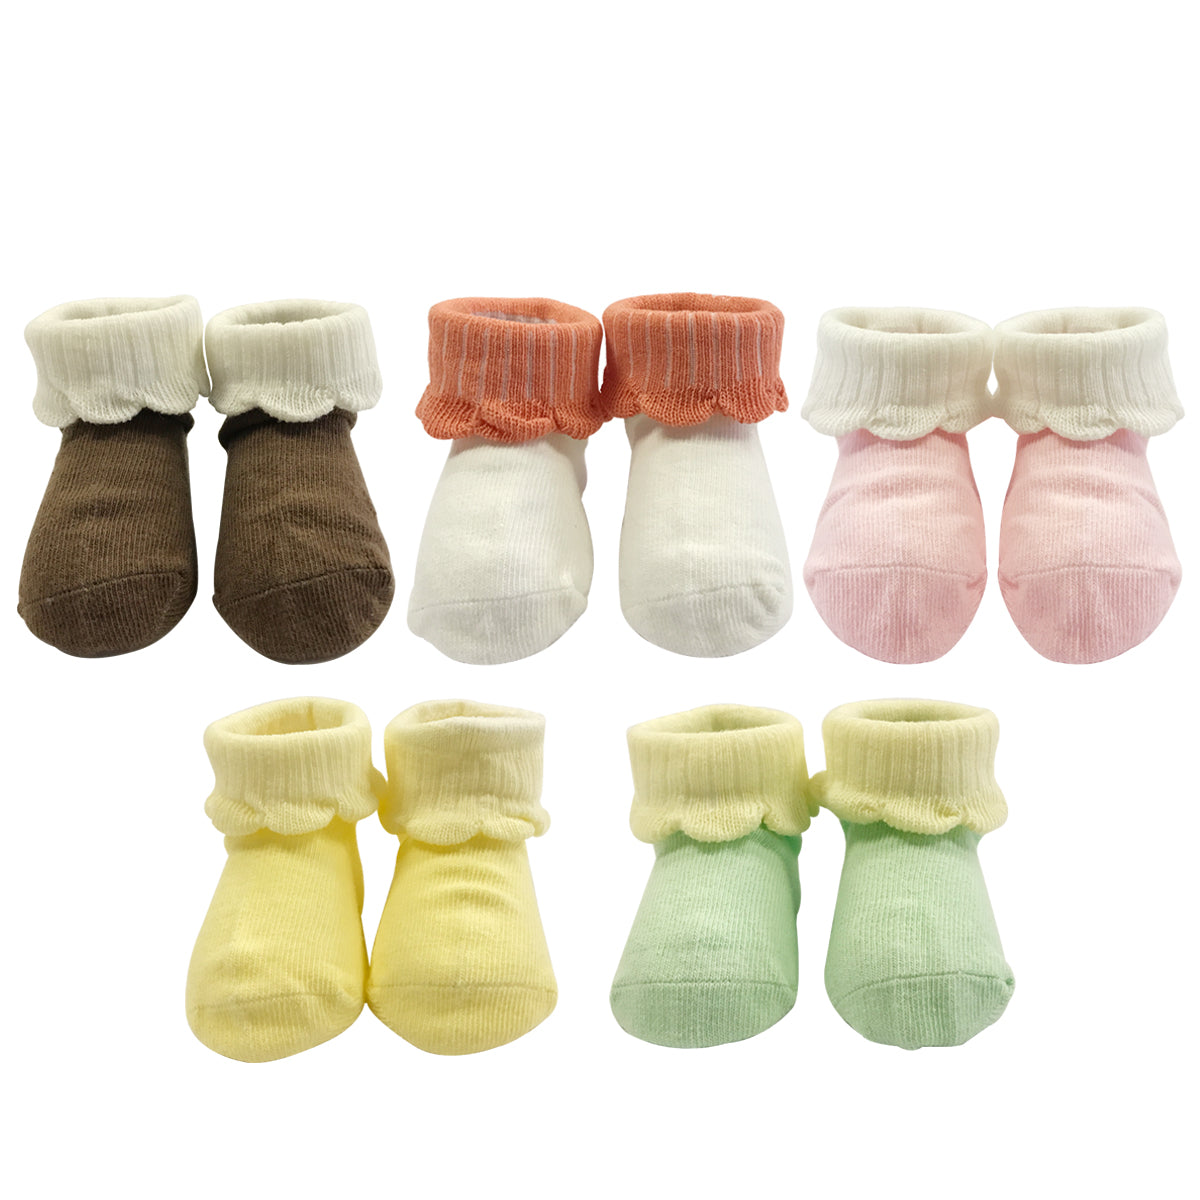 Wrapables Macaroon Color Baby Socks (Set of 5)